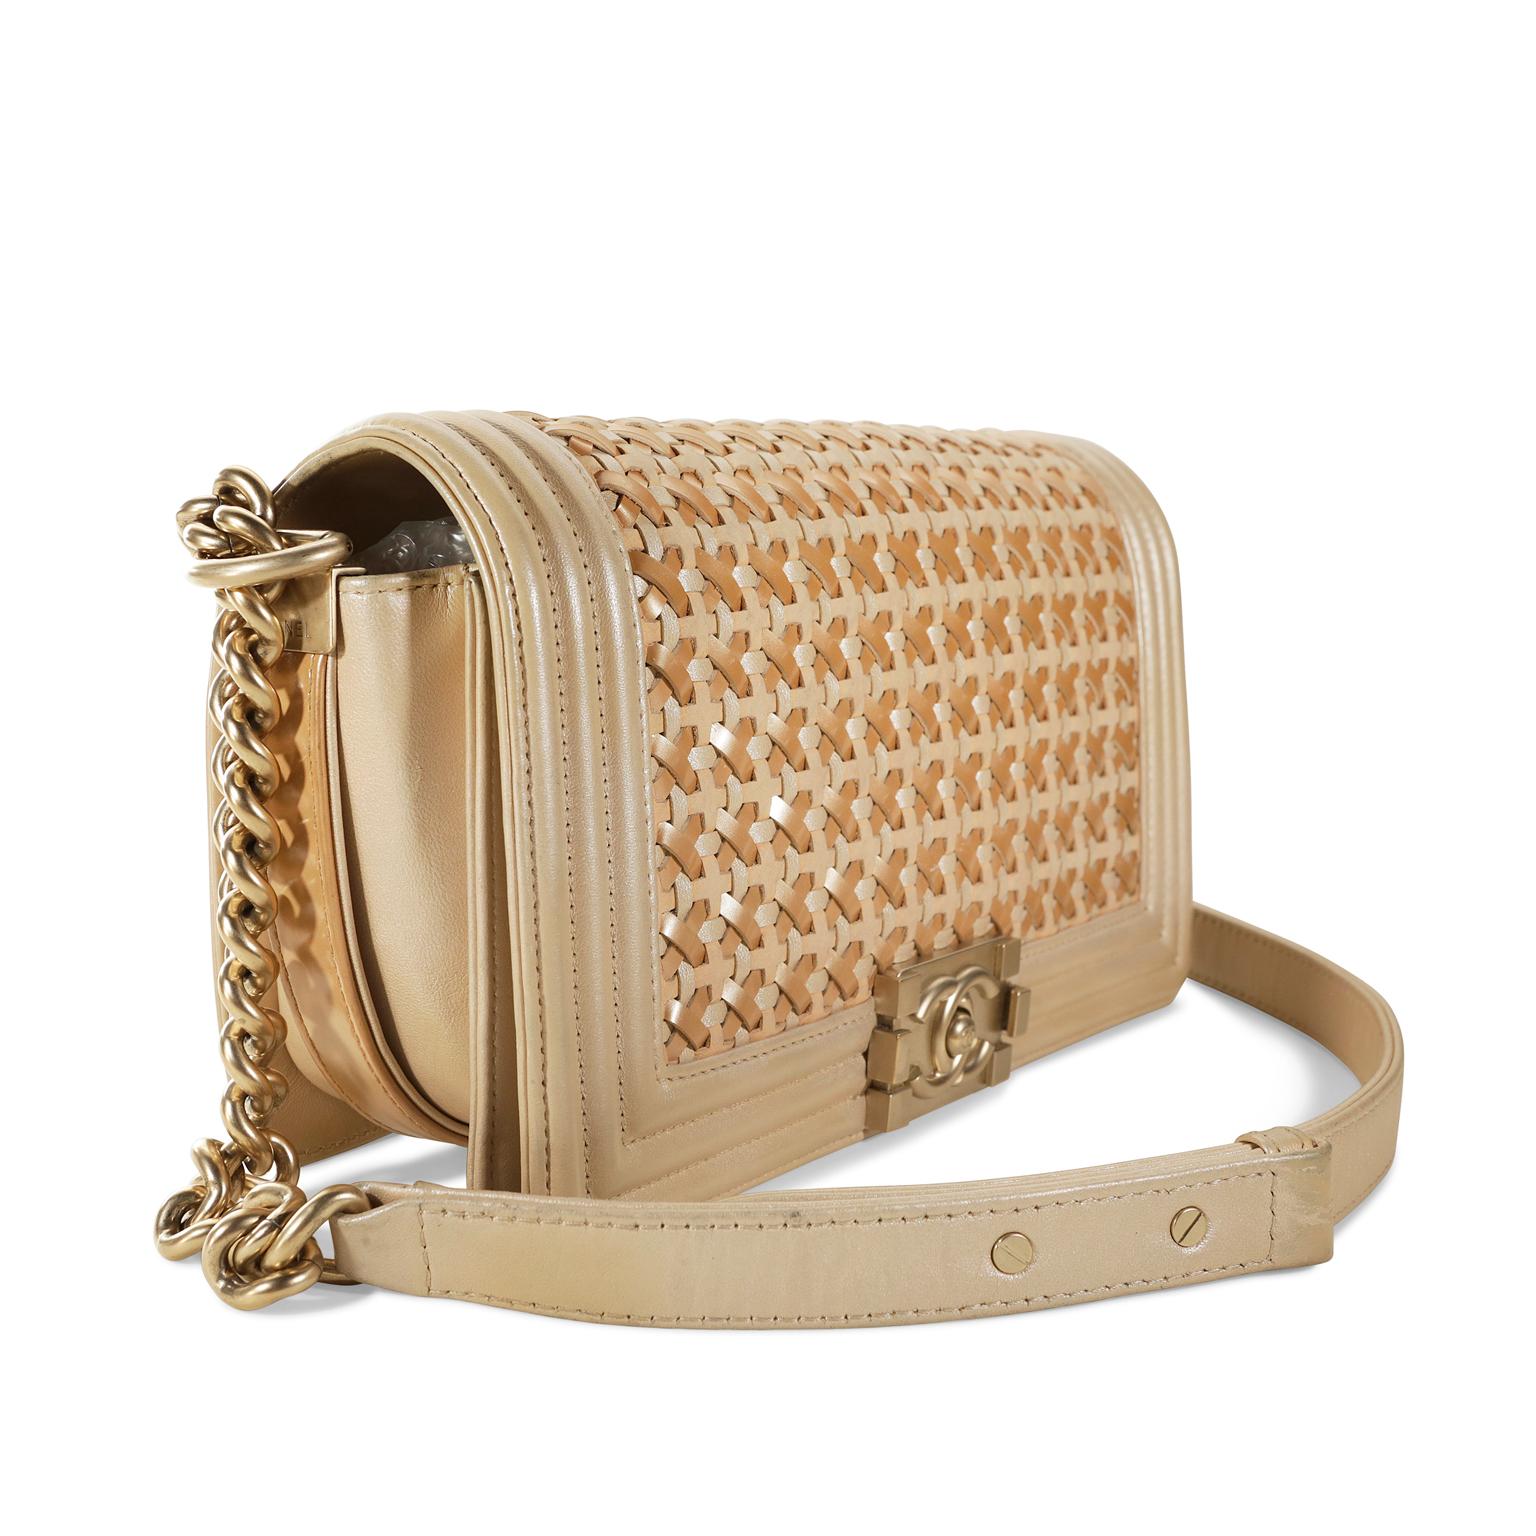 Chanel Beige Leather Woven Boy Bag- Pristine, unworn condition
Perfectly scaled for night or day in the medium silhouette, this special Boy Bag is both edgy and classic.
Neutral beige leather is woven in a basket stitch with signature Boy Bag welted